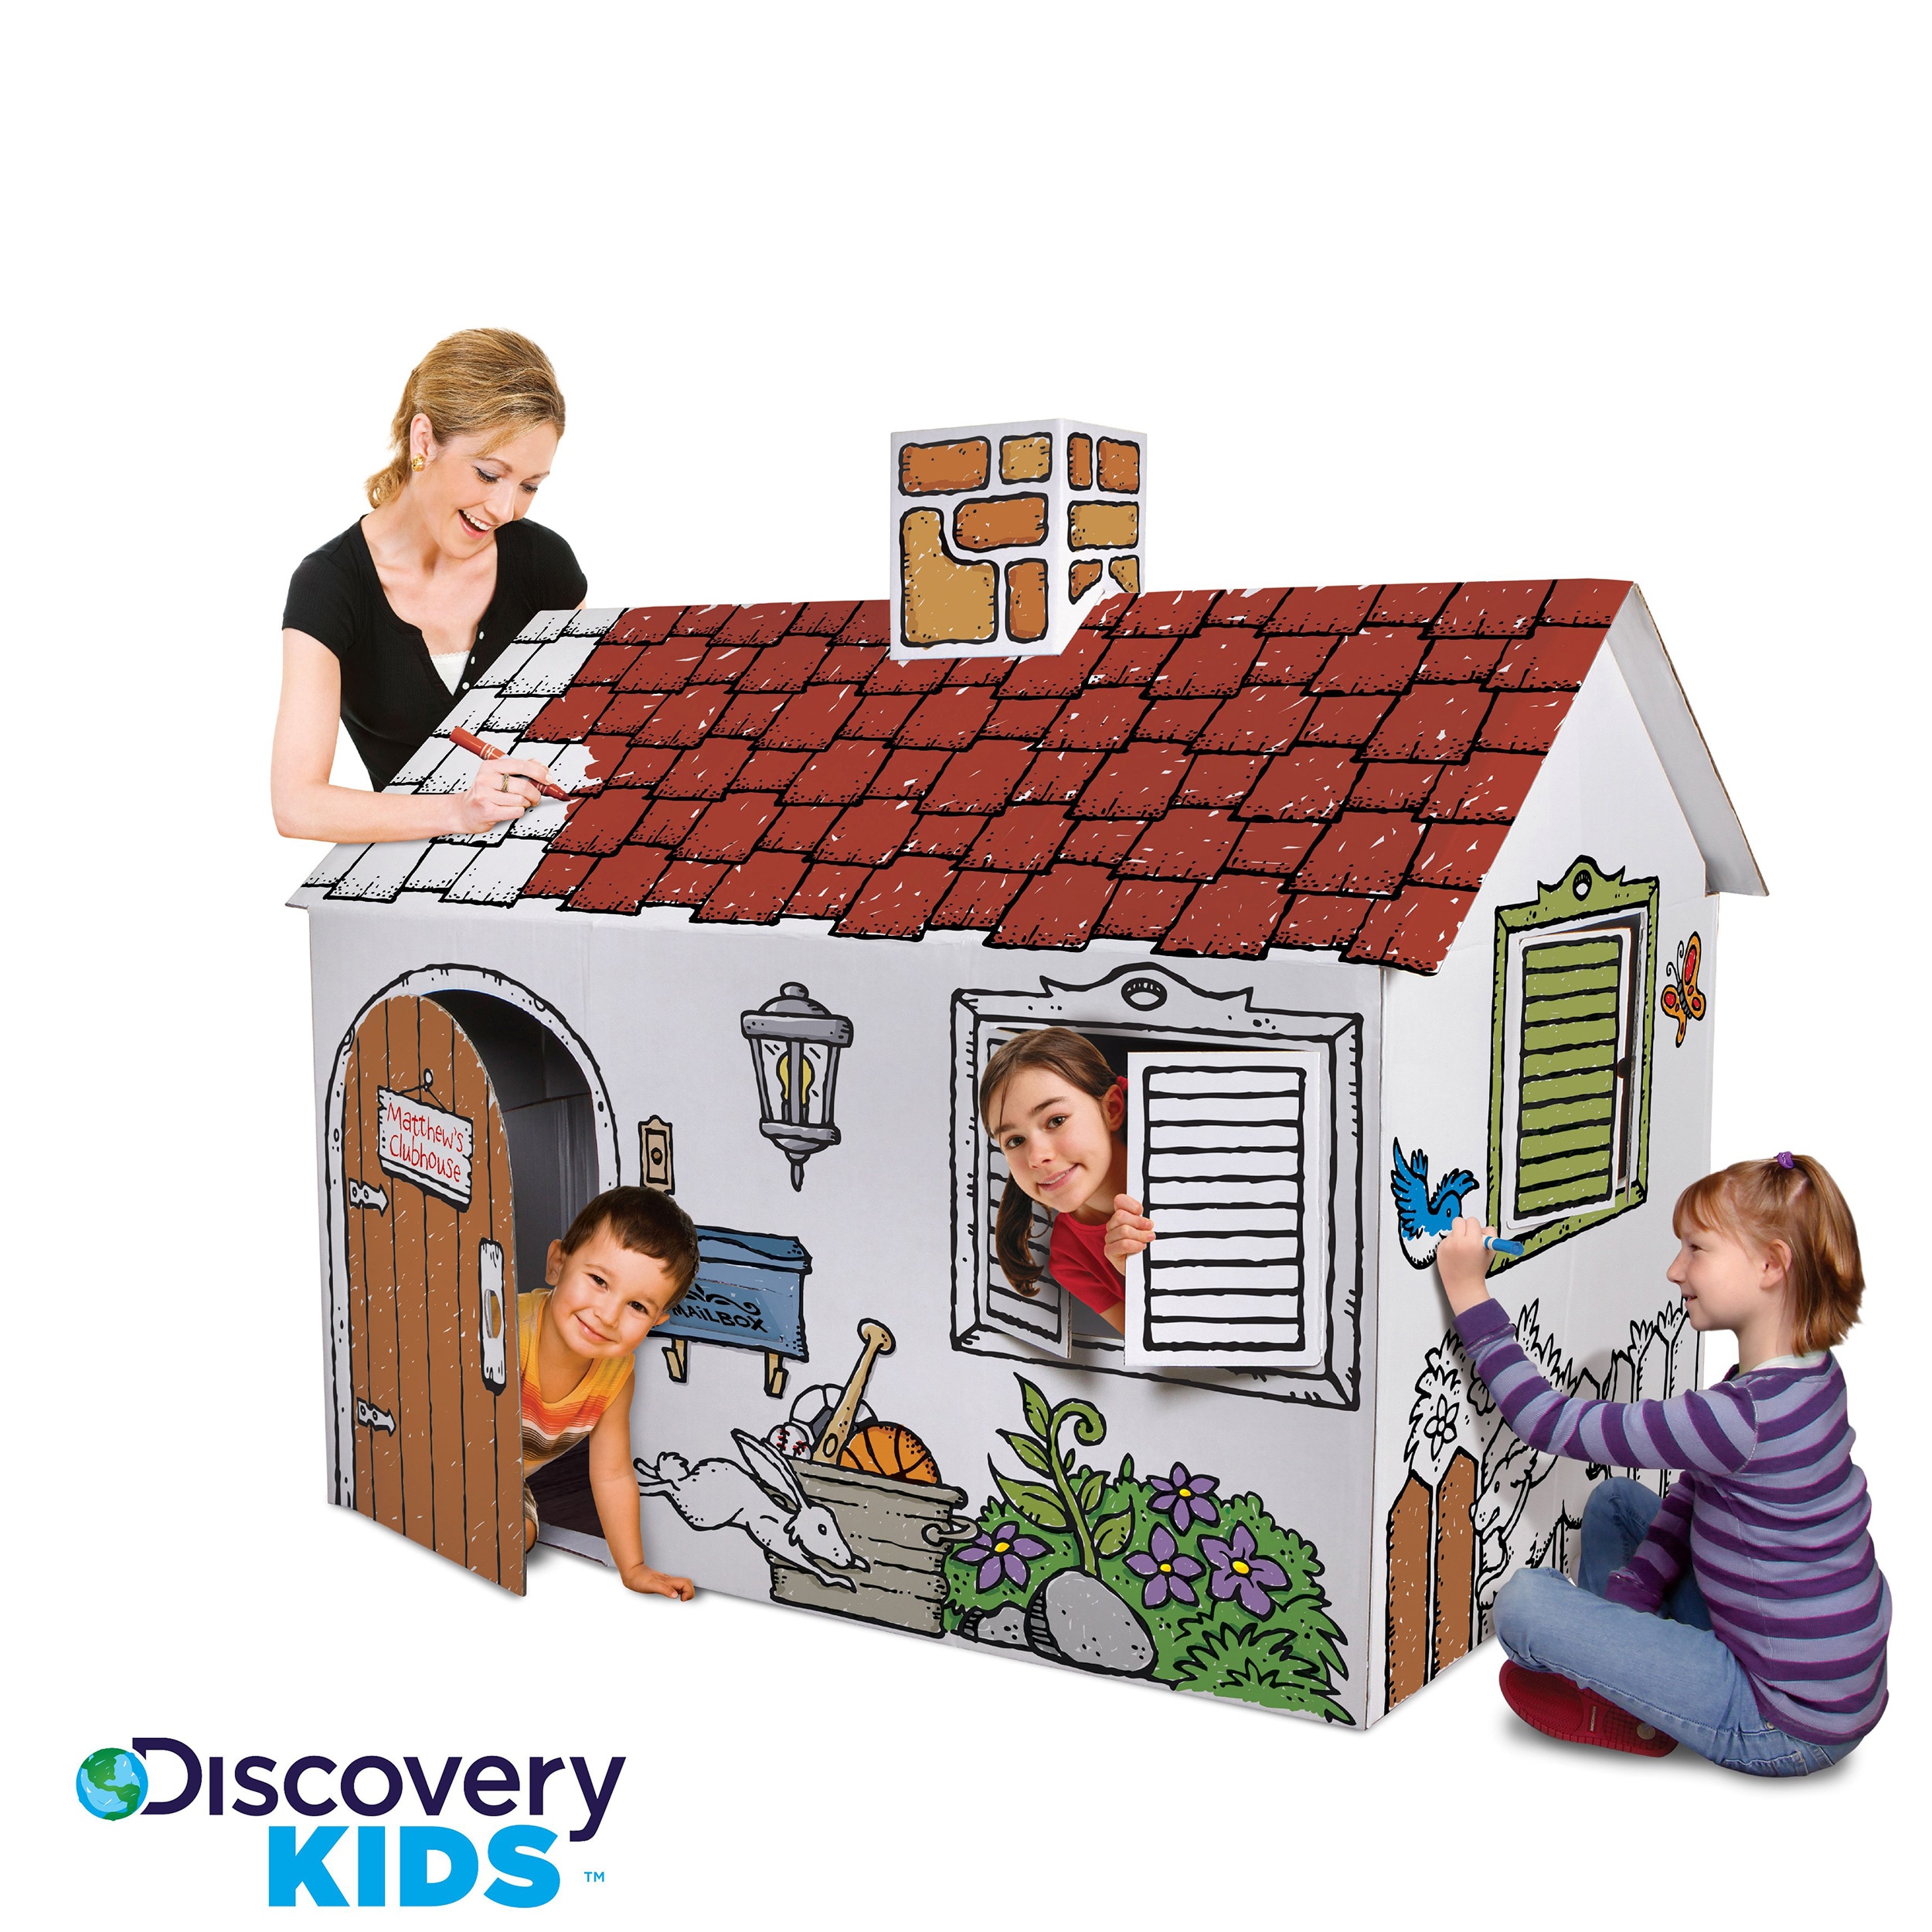 Discovery Kids Cardboard Color and Play Playhouse   14493300